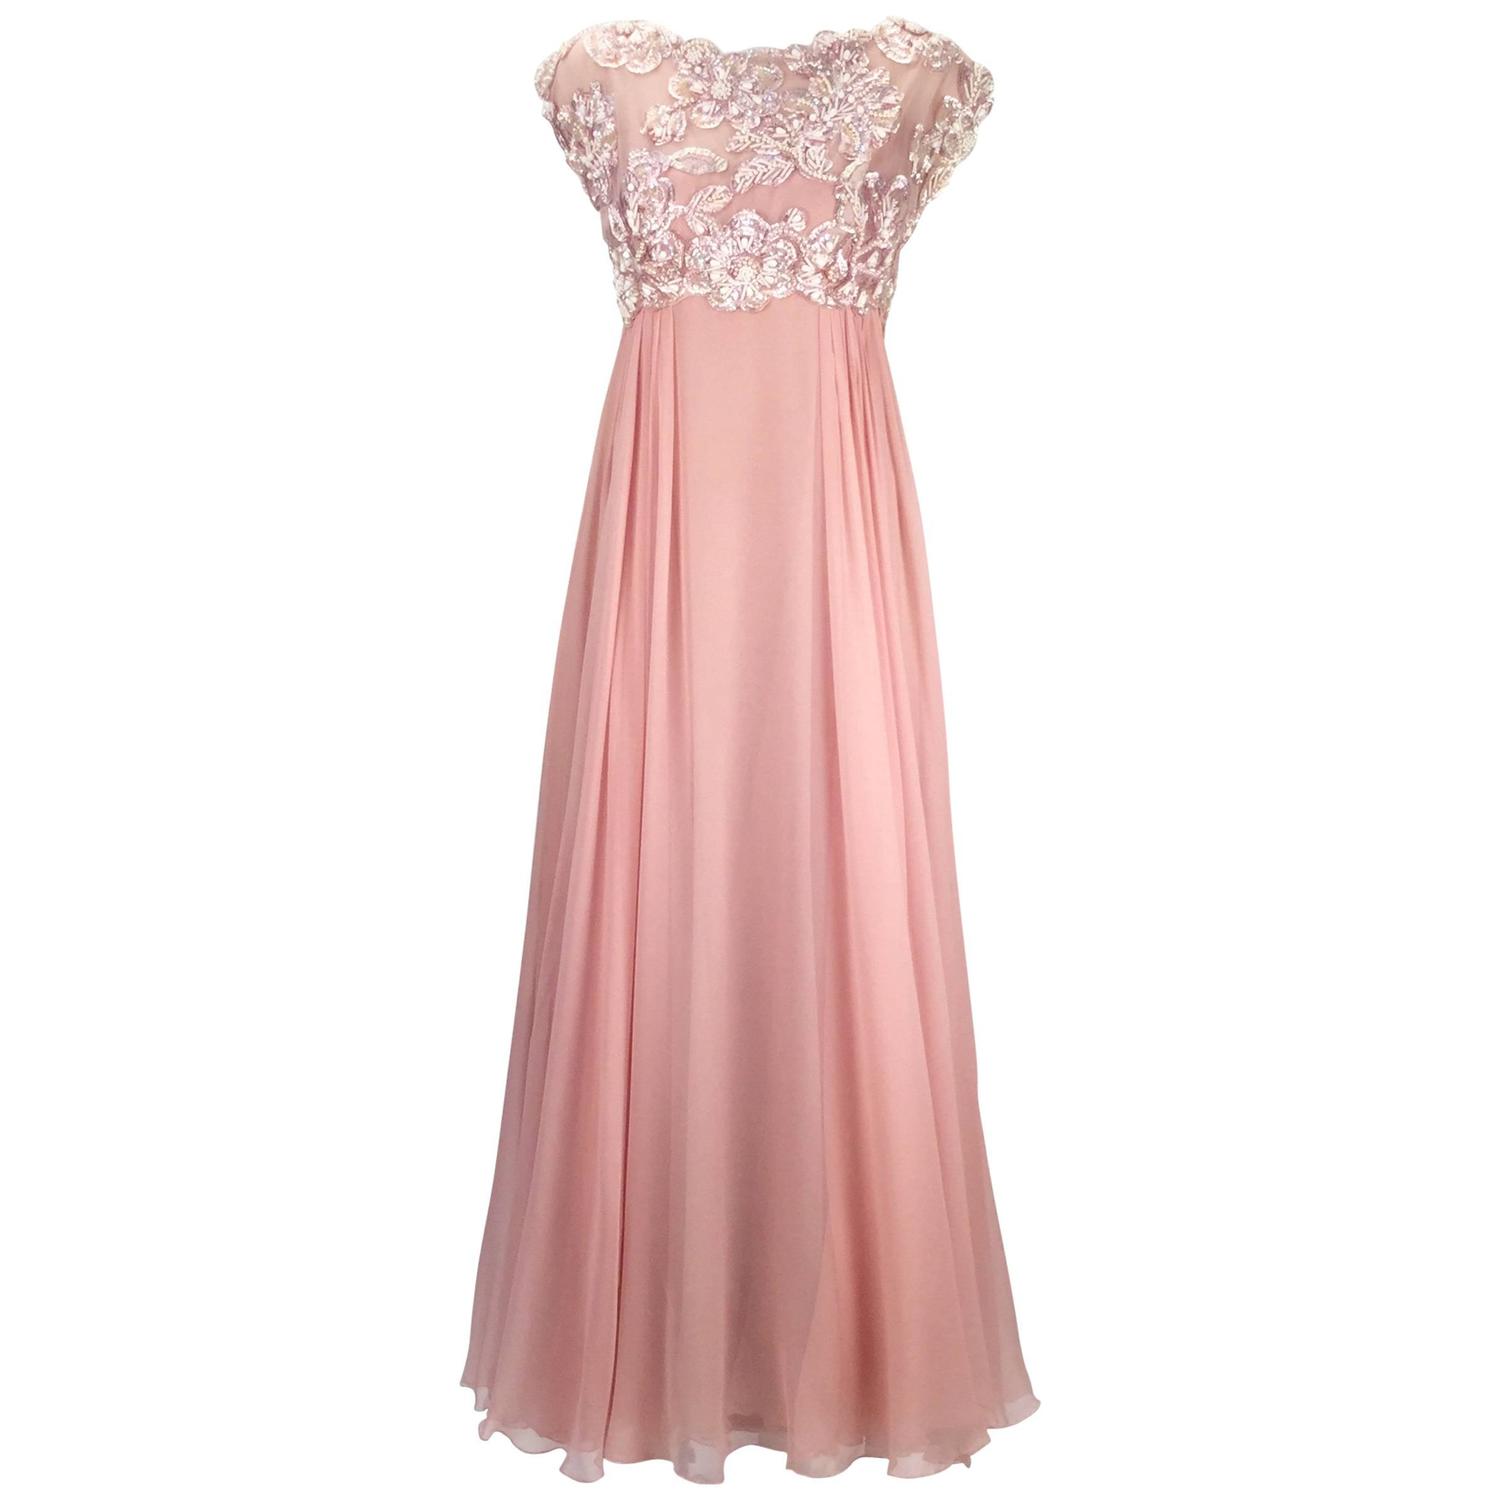 1960s Helen Rose Silk Pink Beaded Evening Gown For Sale at 1stdibs